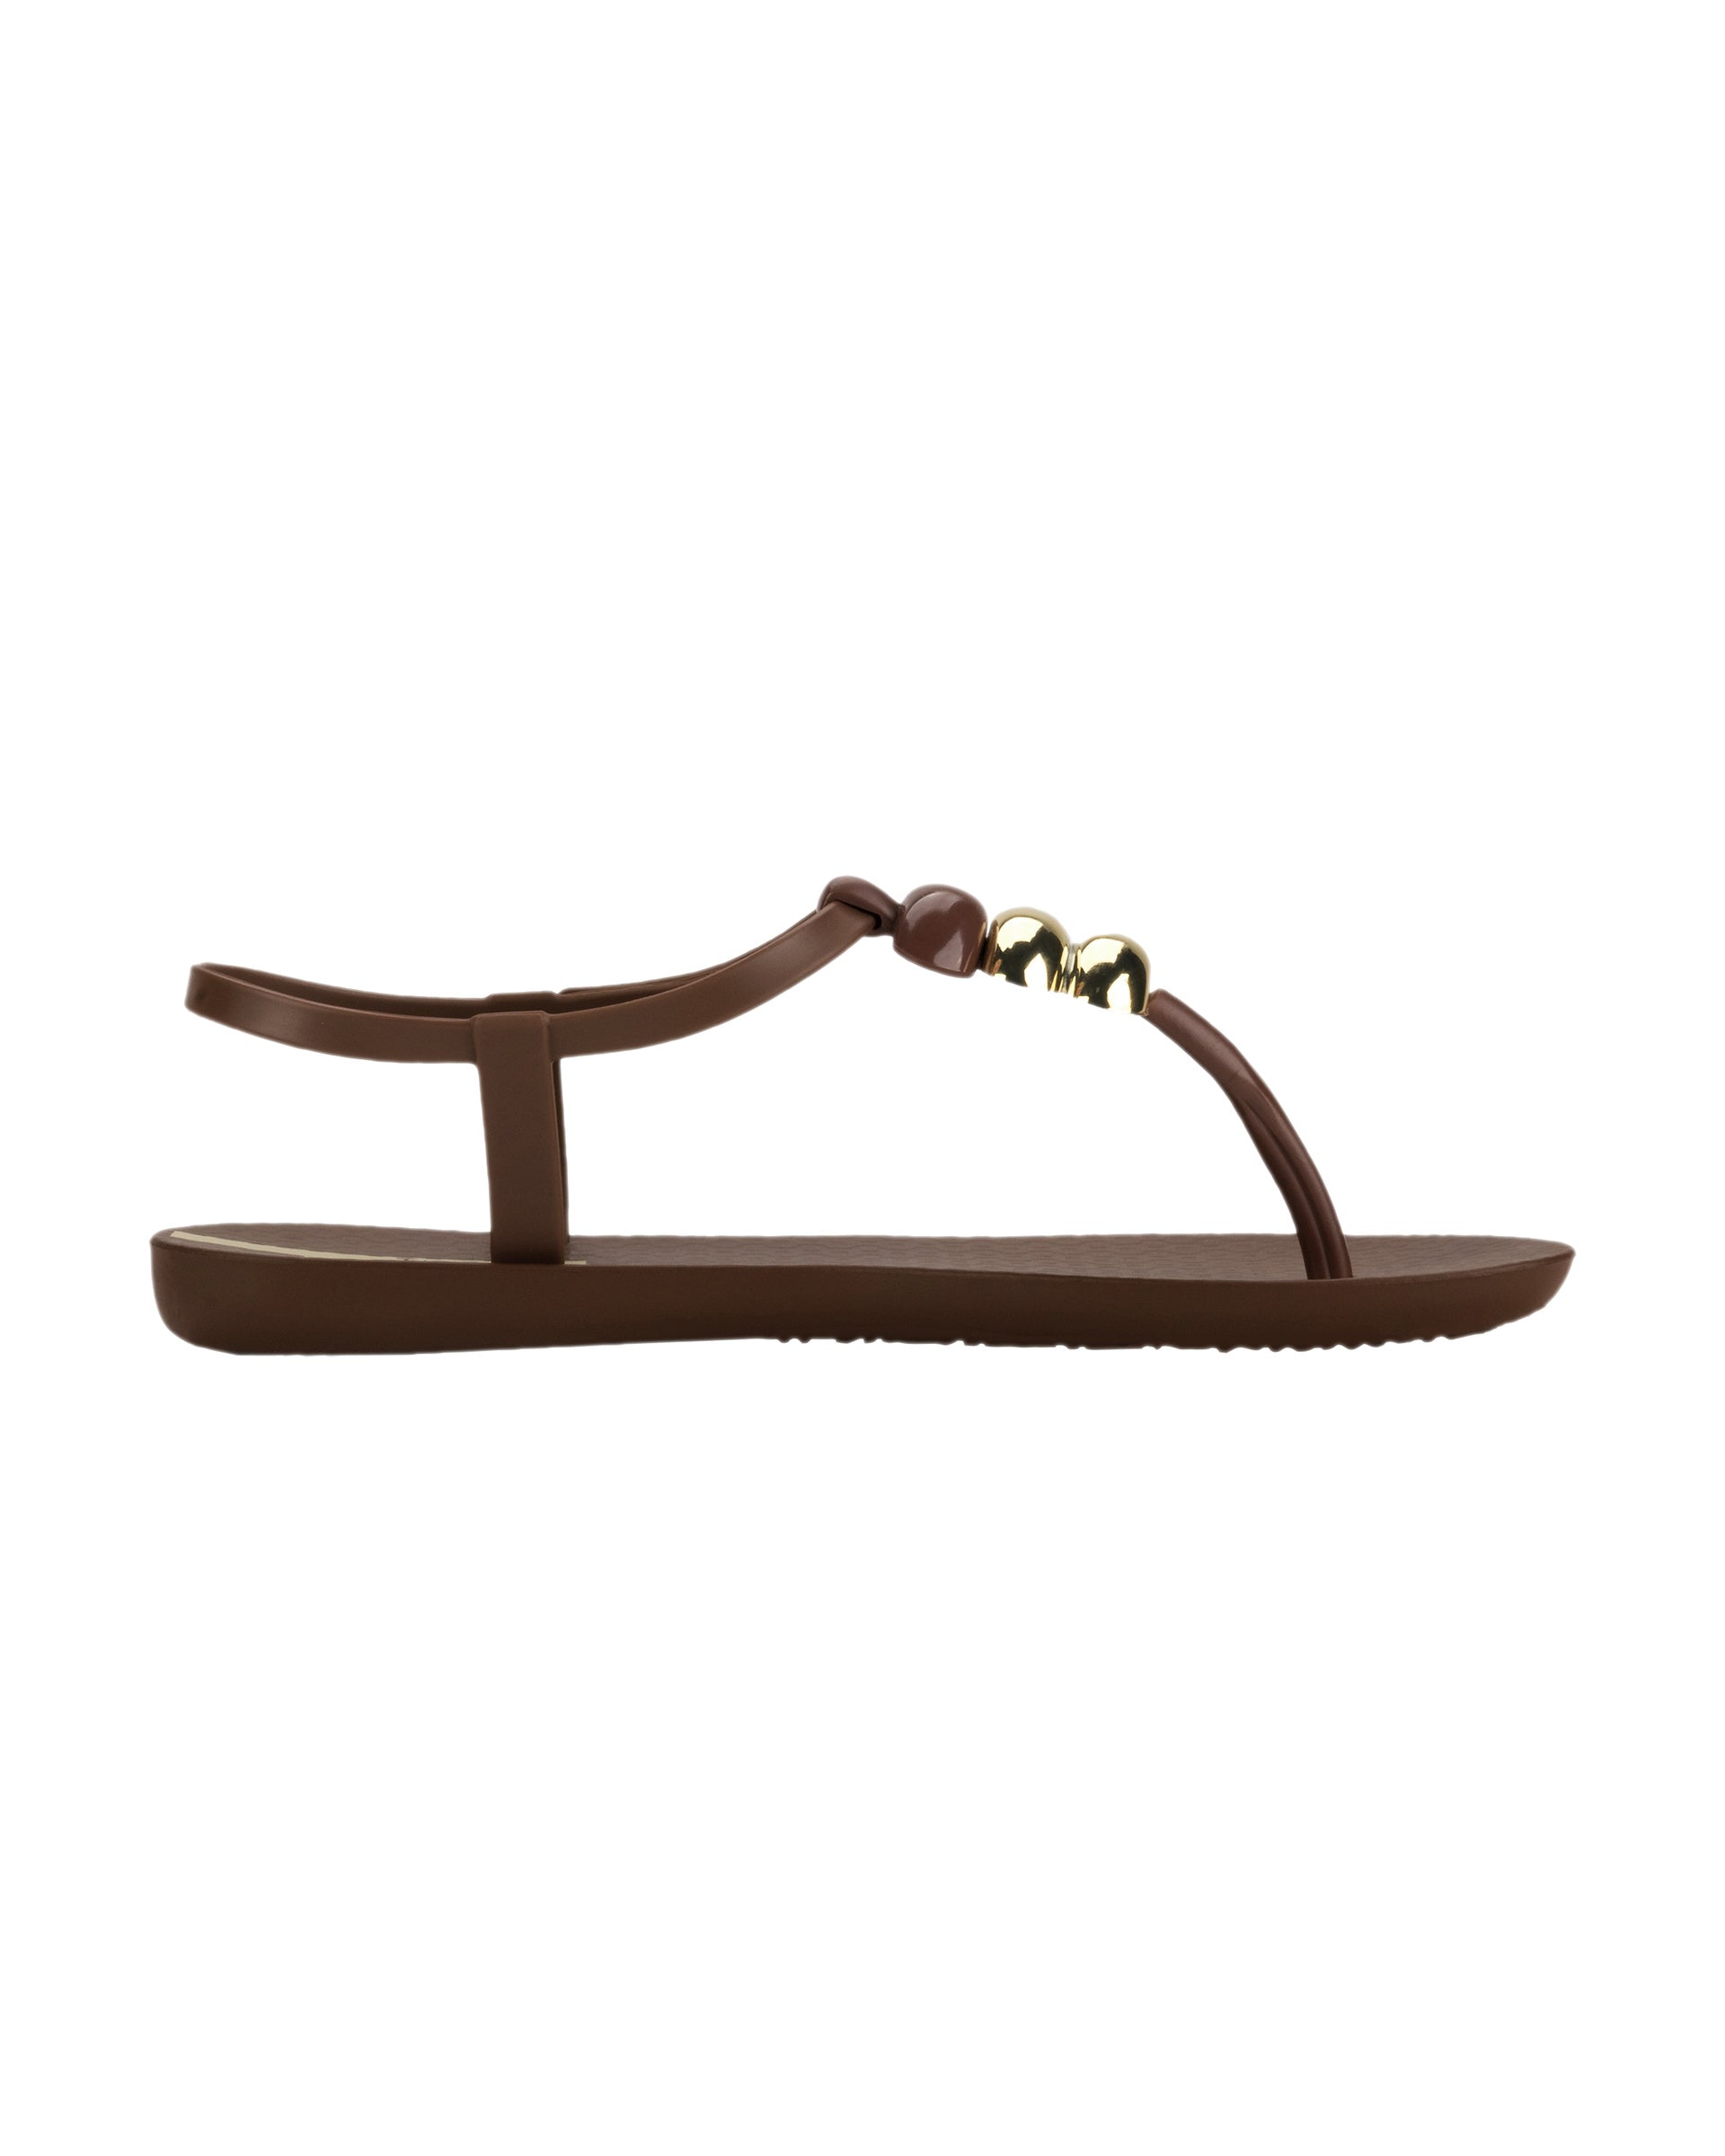 Outer side view of a brown Ipanema Class women's sandal with 3 bubble baubles on the t-strap.